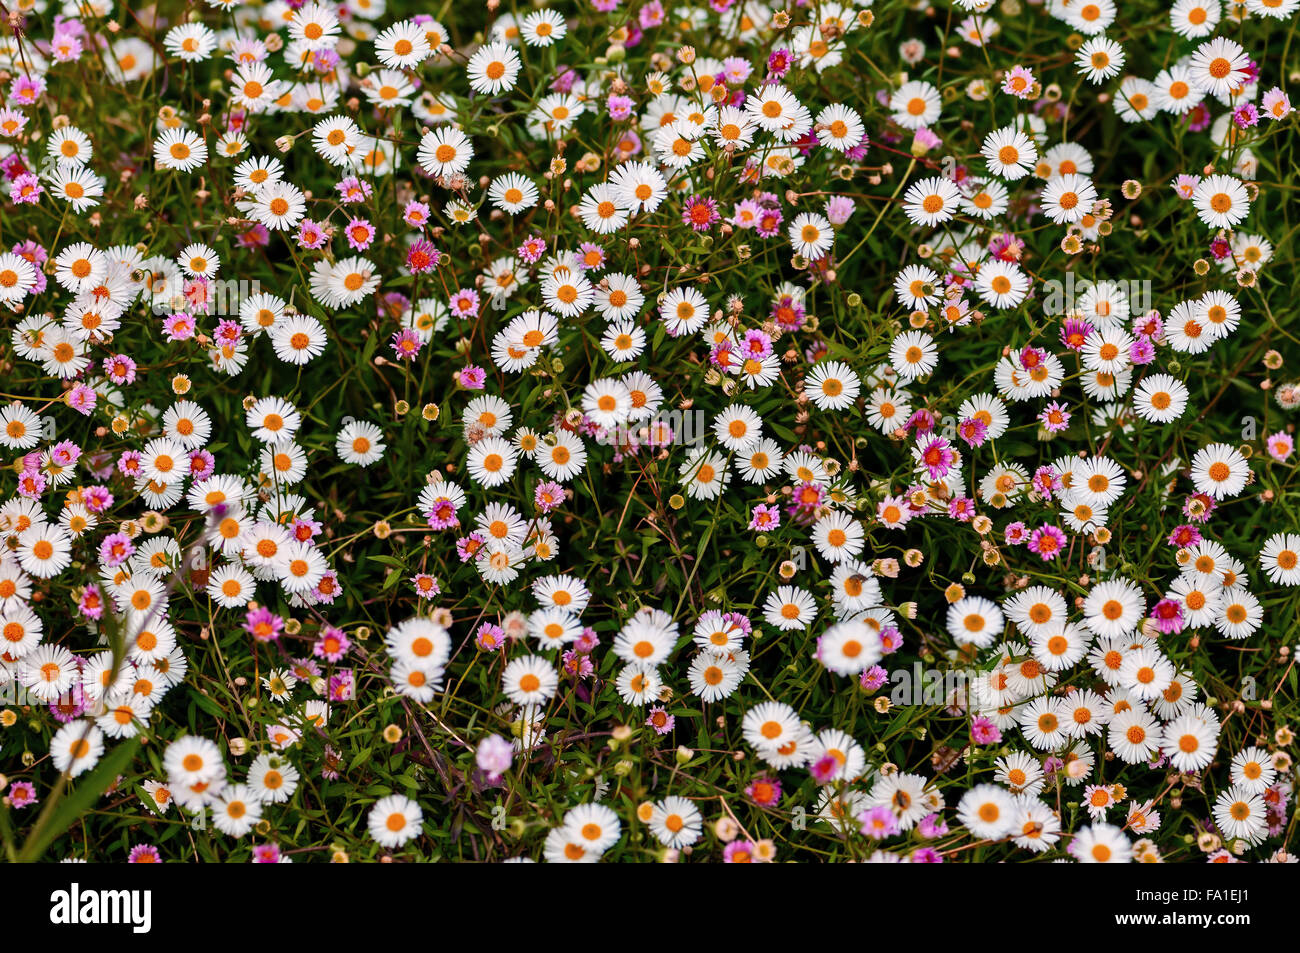 Large group of daisies background springtime Stock Photo